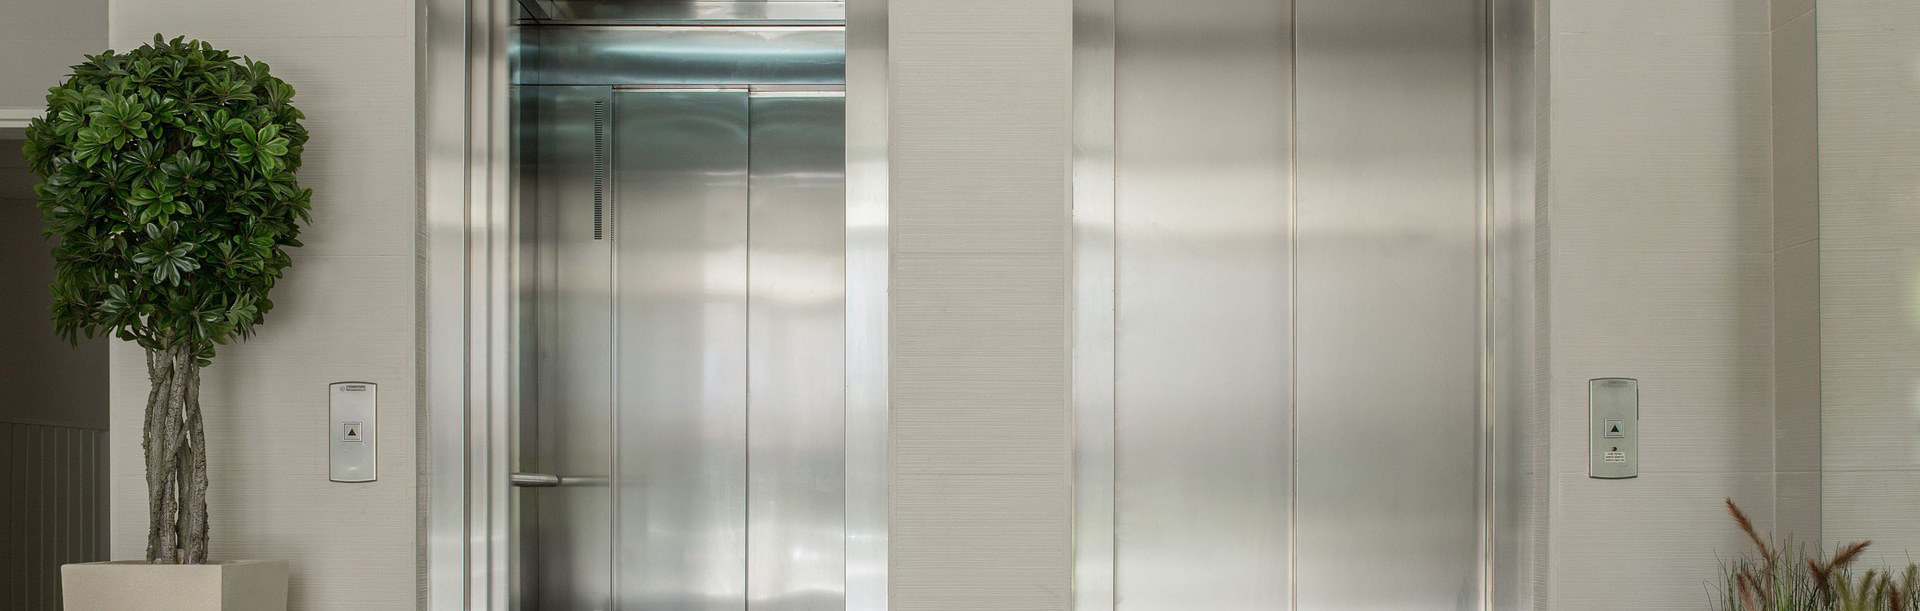 In the Market for a Residential Elevator? Take a Look at These